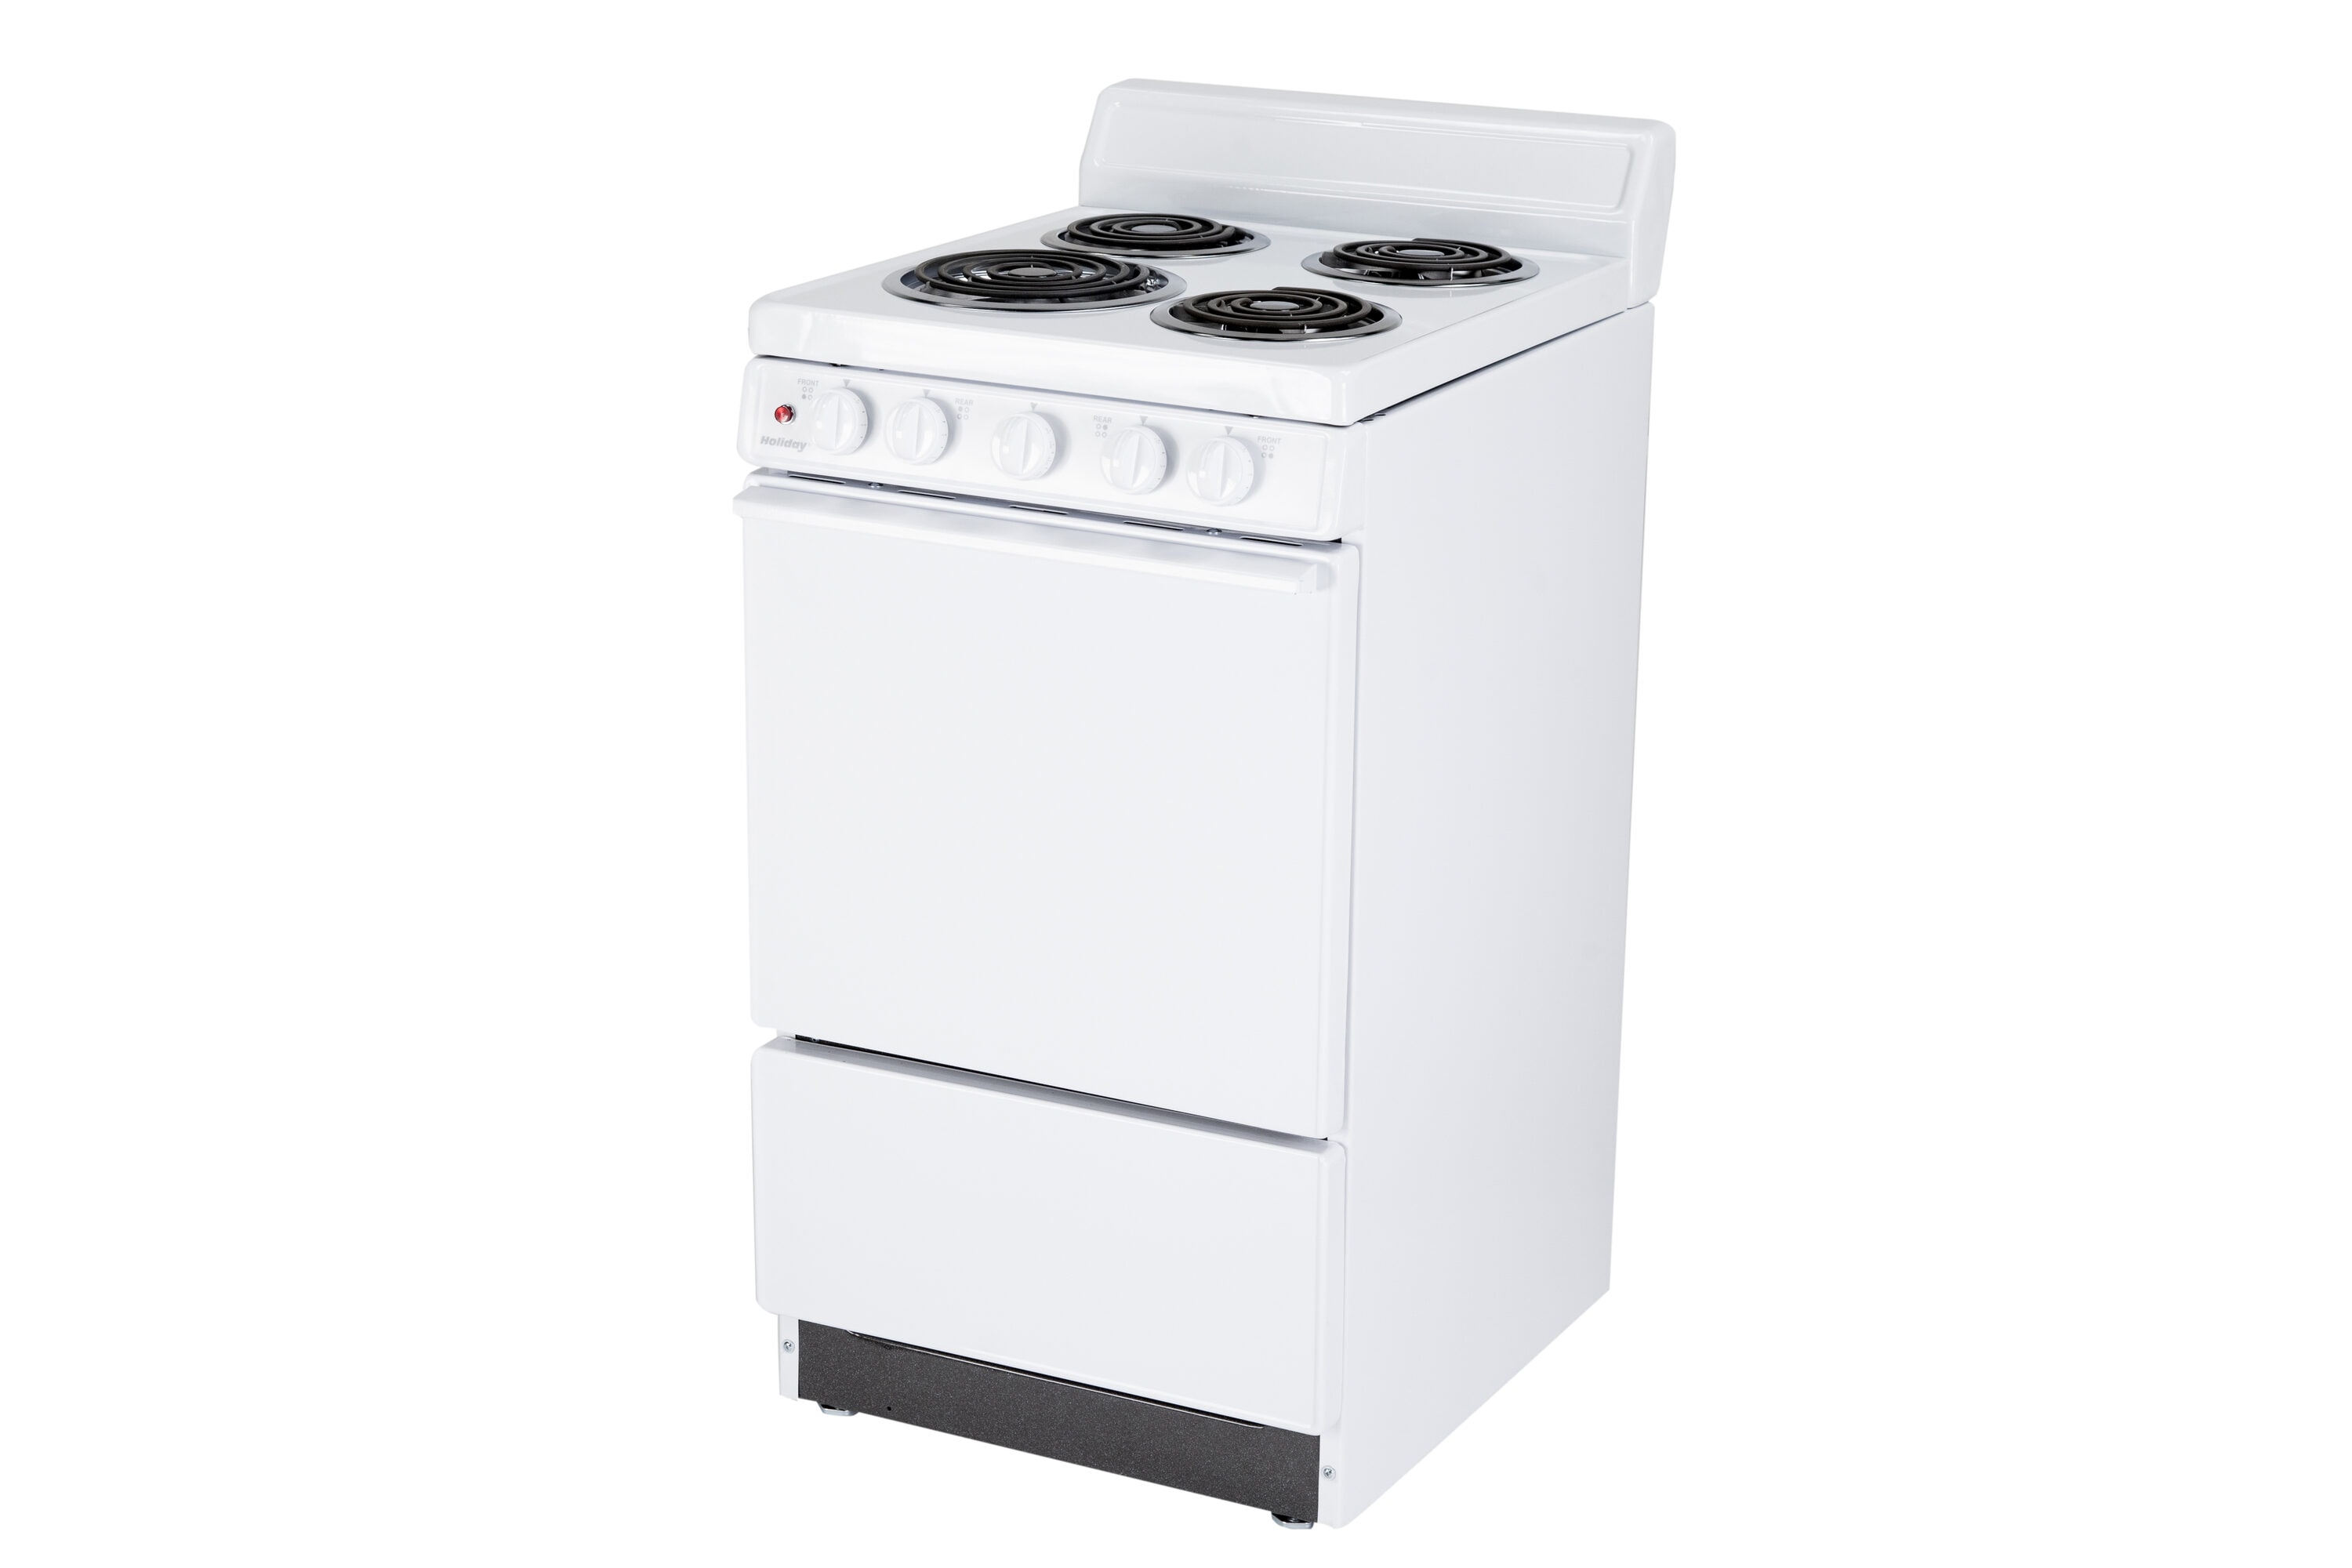 New Out-of-Box] Eno Propane Gas Oven